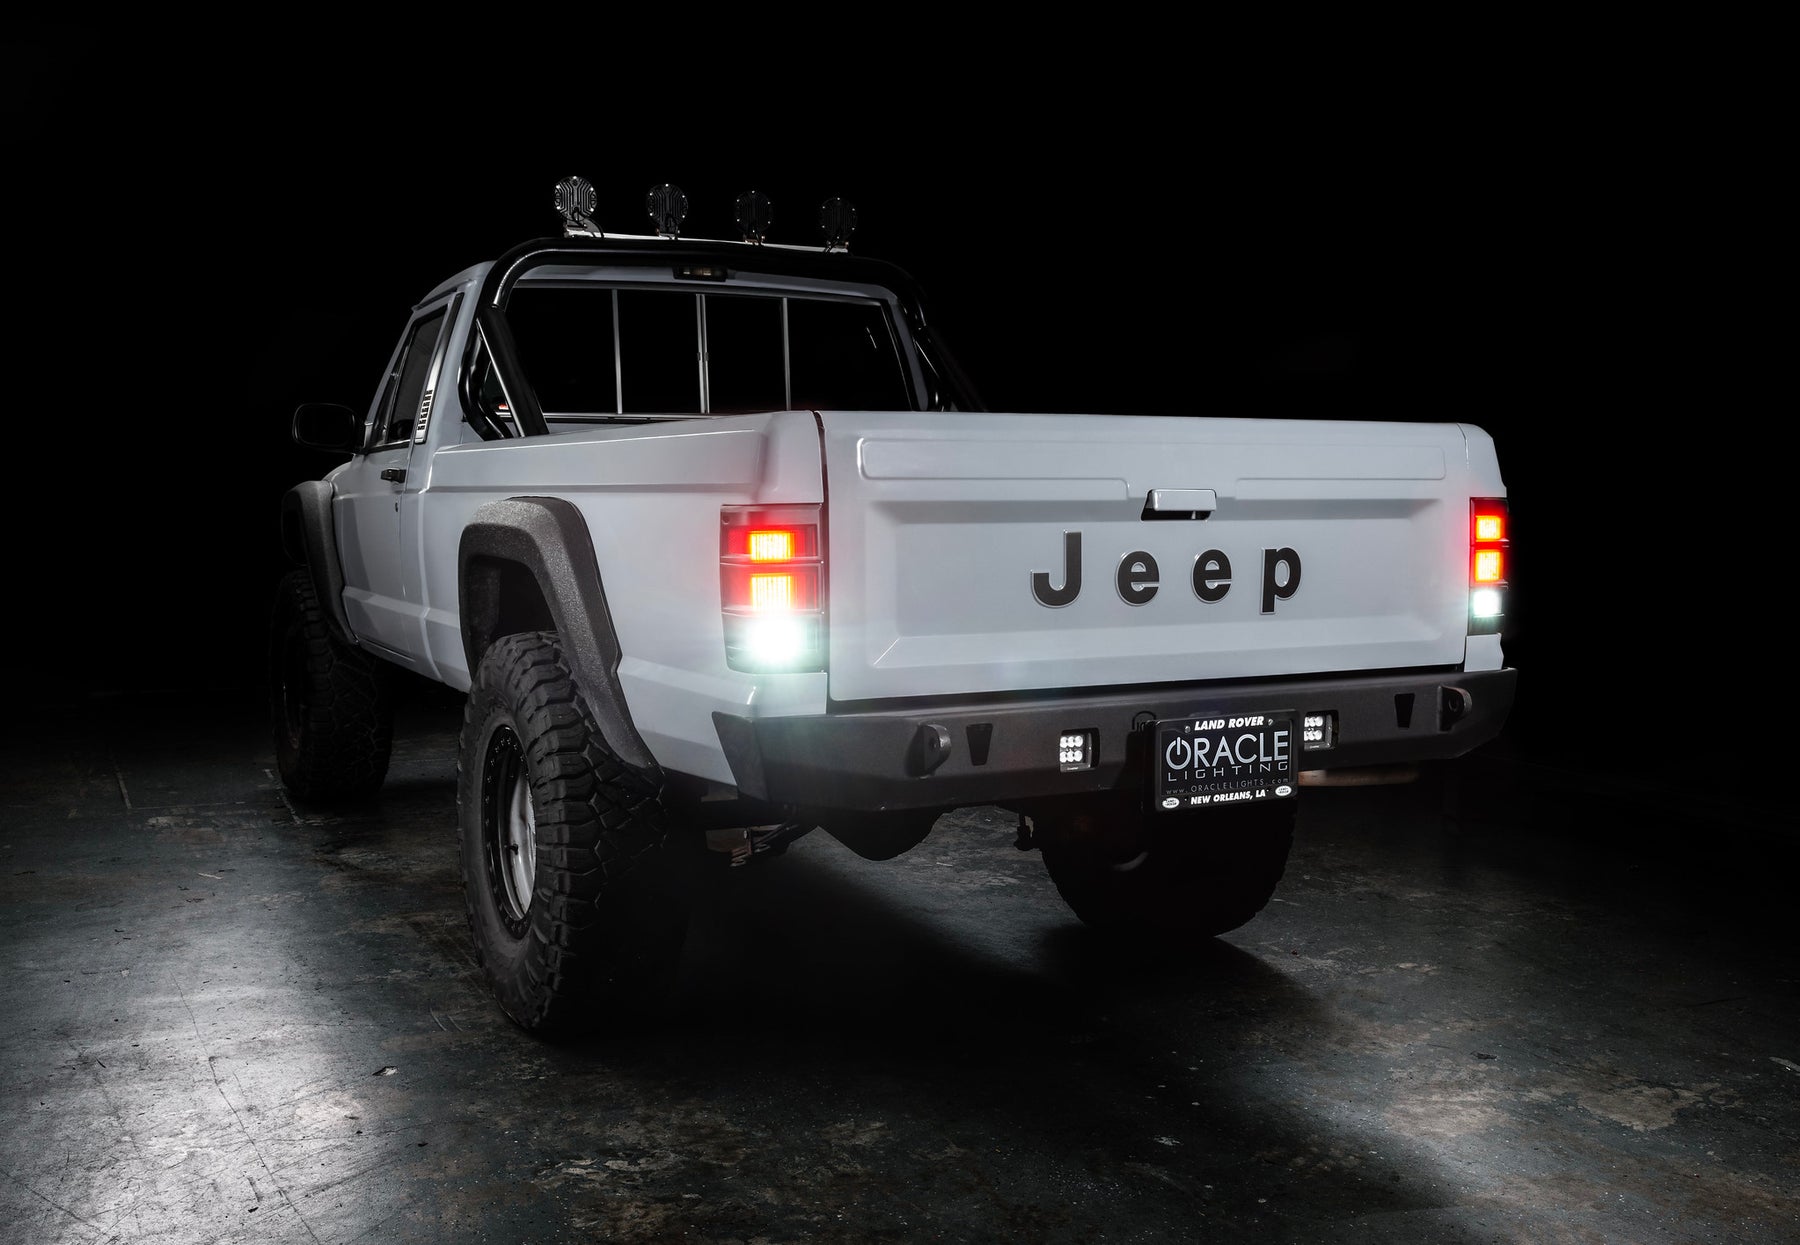 FIRST LOOK: Jeep Comanche (MJ) LED Tail Lights from ORACLE Lighting